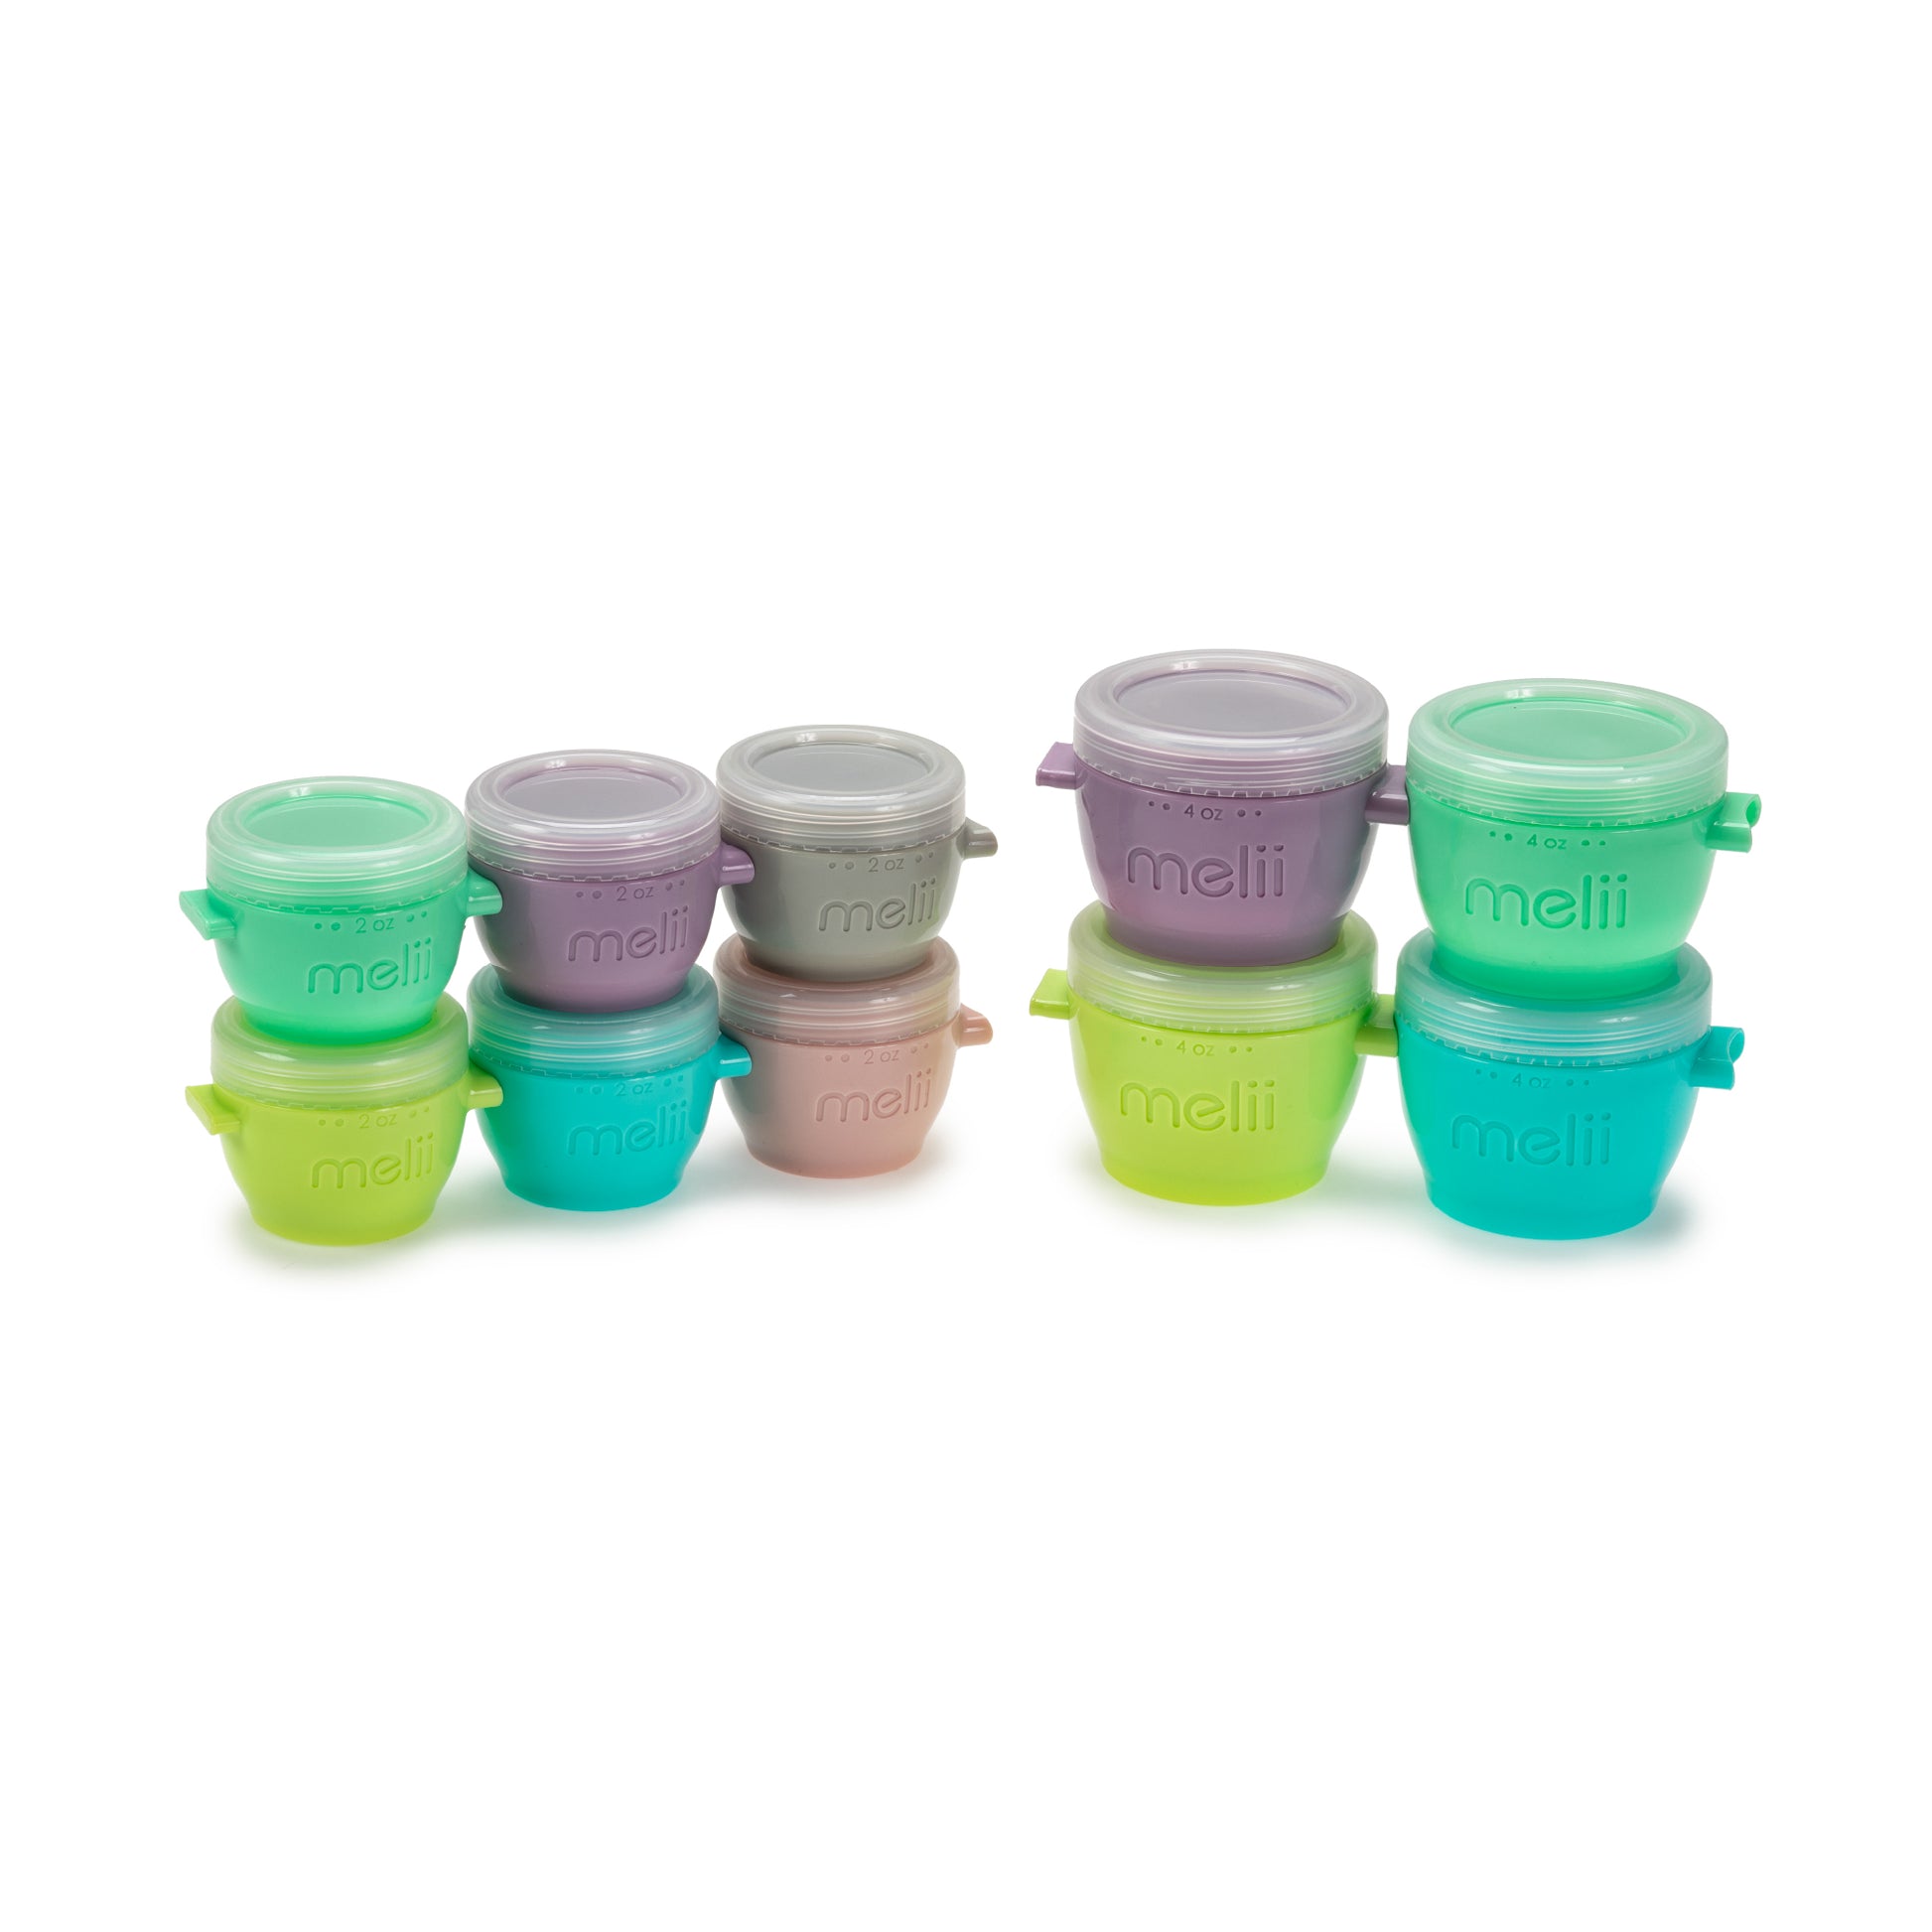 Melii Snap & Go Pods - Airtight & Leakproof Baby Food Containers - Baby Food Storage Pods for Effortless Mealtime, 2oz, set of 6 +  4oz, set of 4